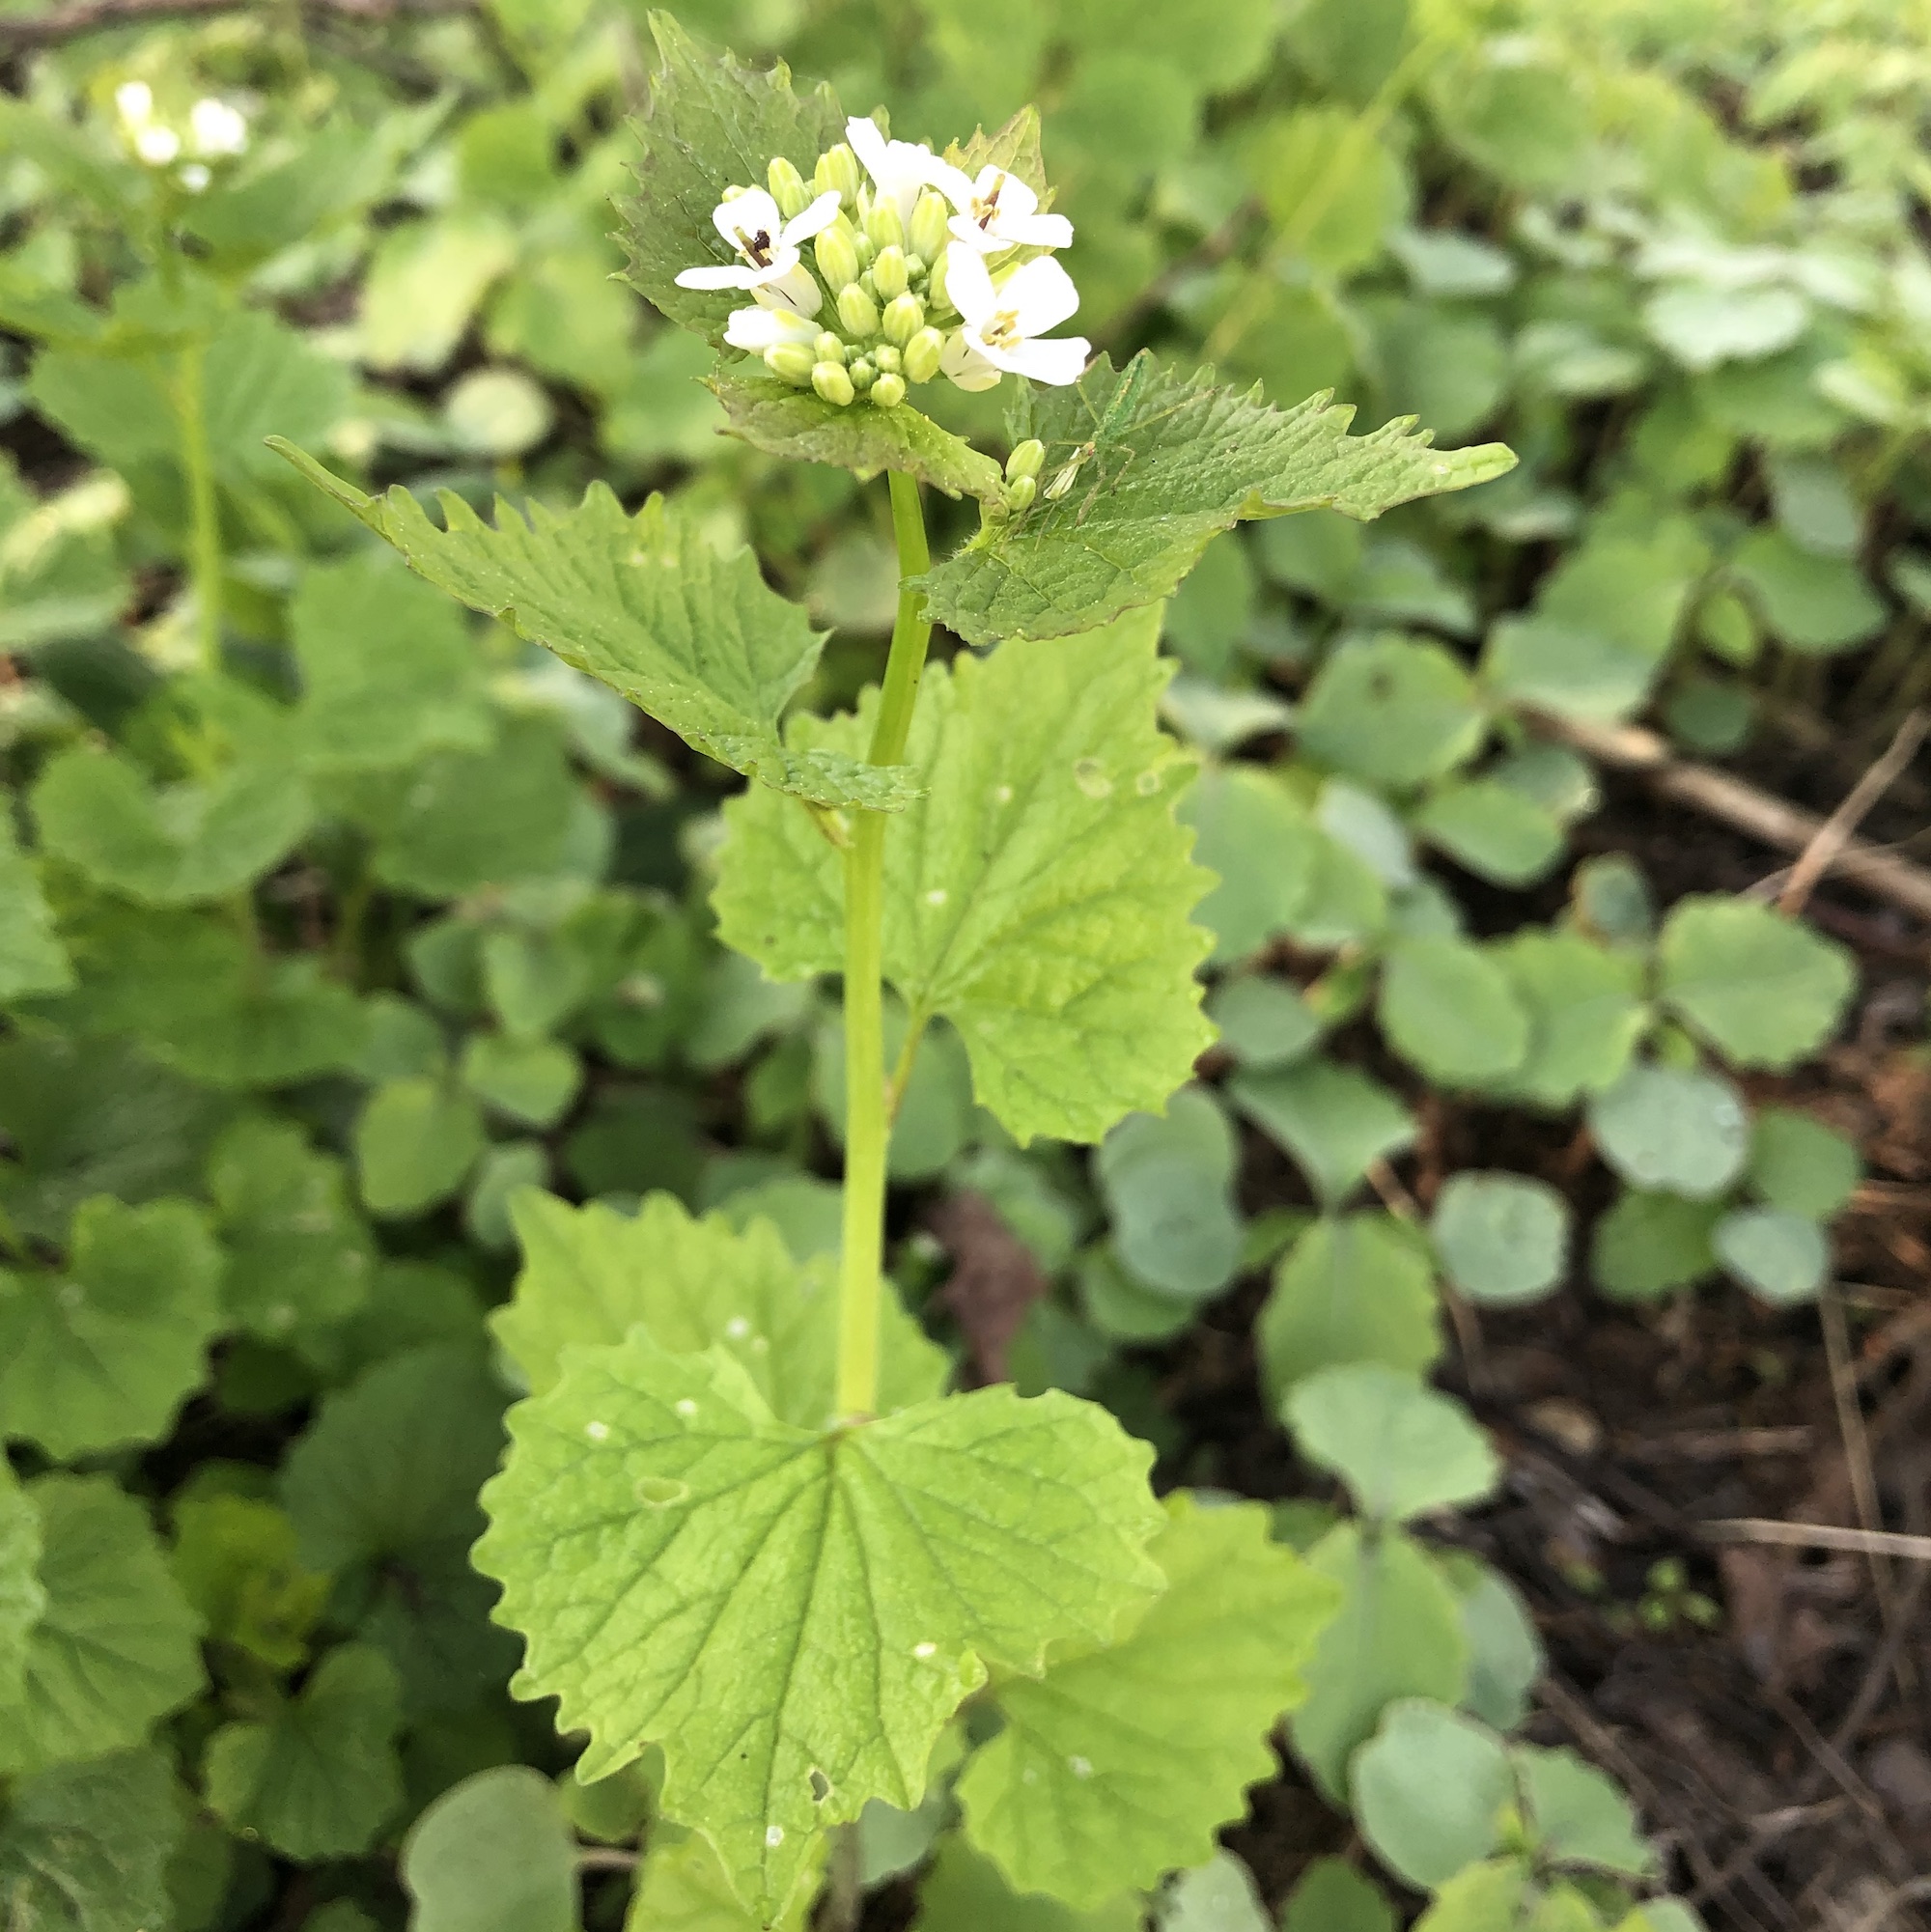 Garlic Mustard by Duck Pond in Madison, Wisconsin on May 15, 2019.